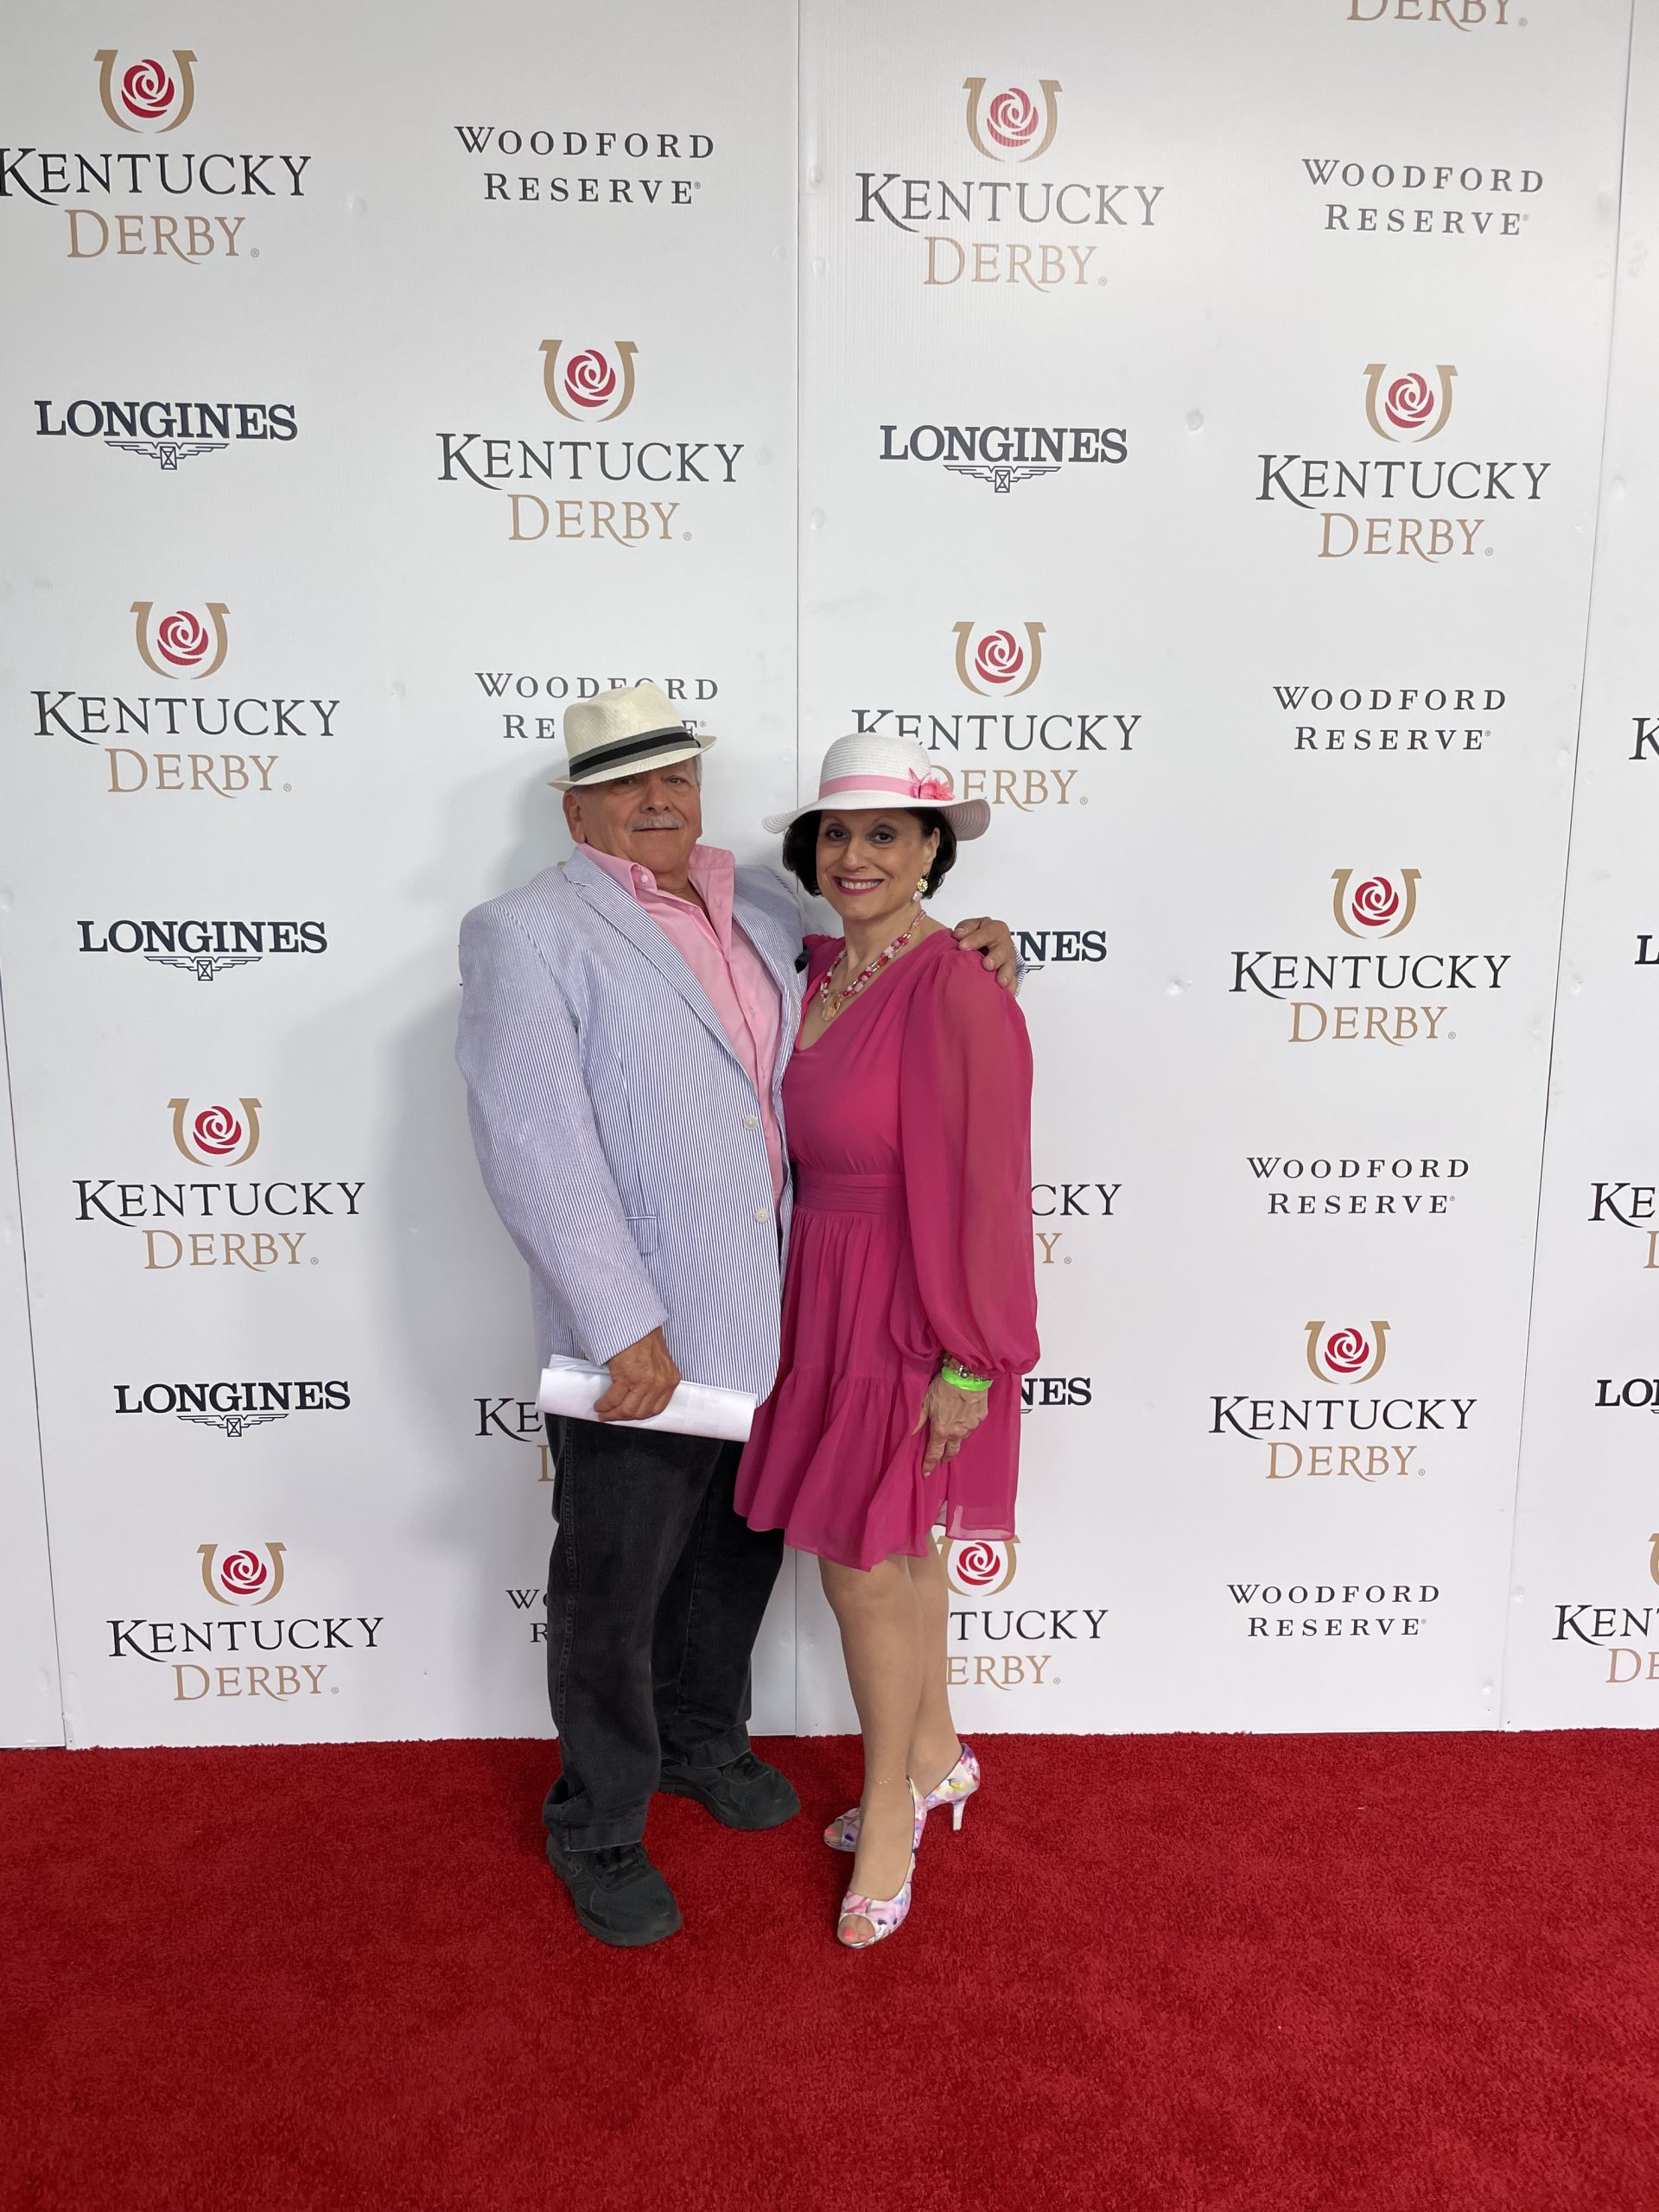 Guests attending the Kentucky Derby